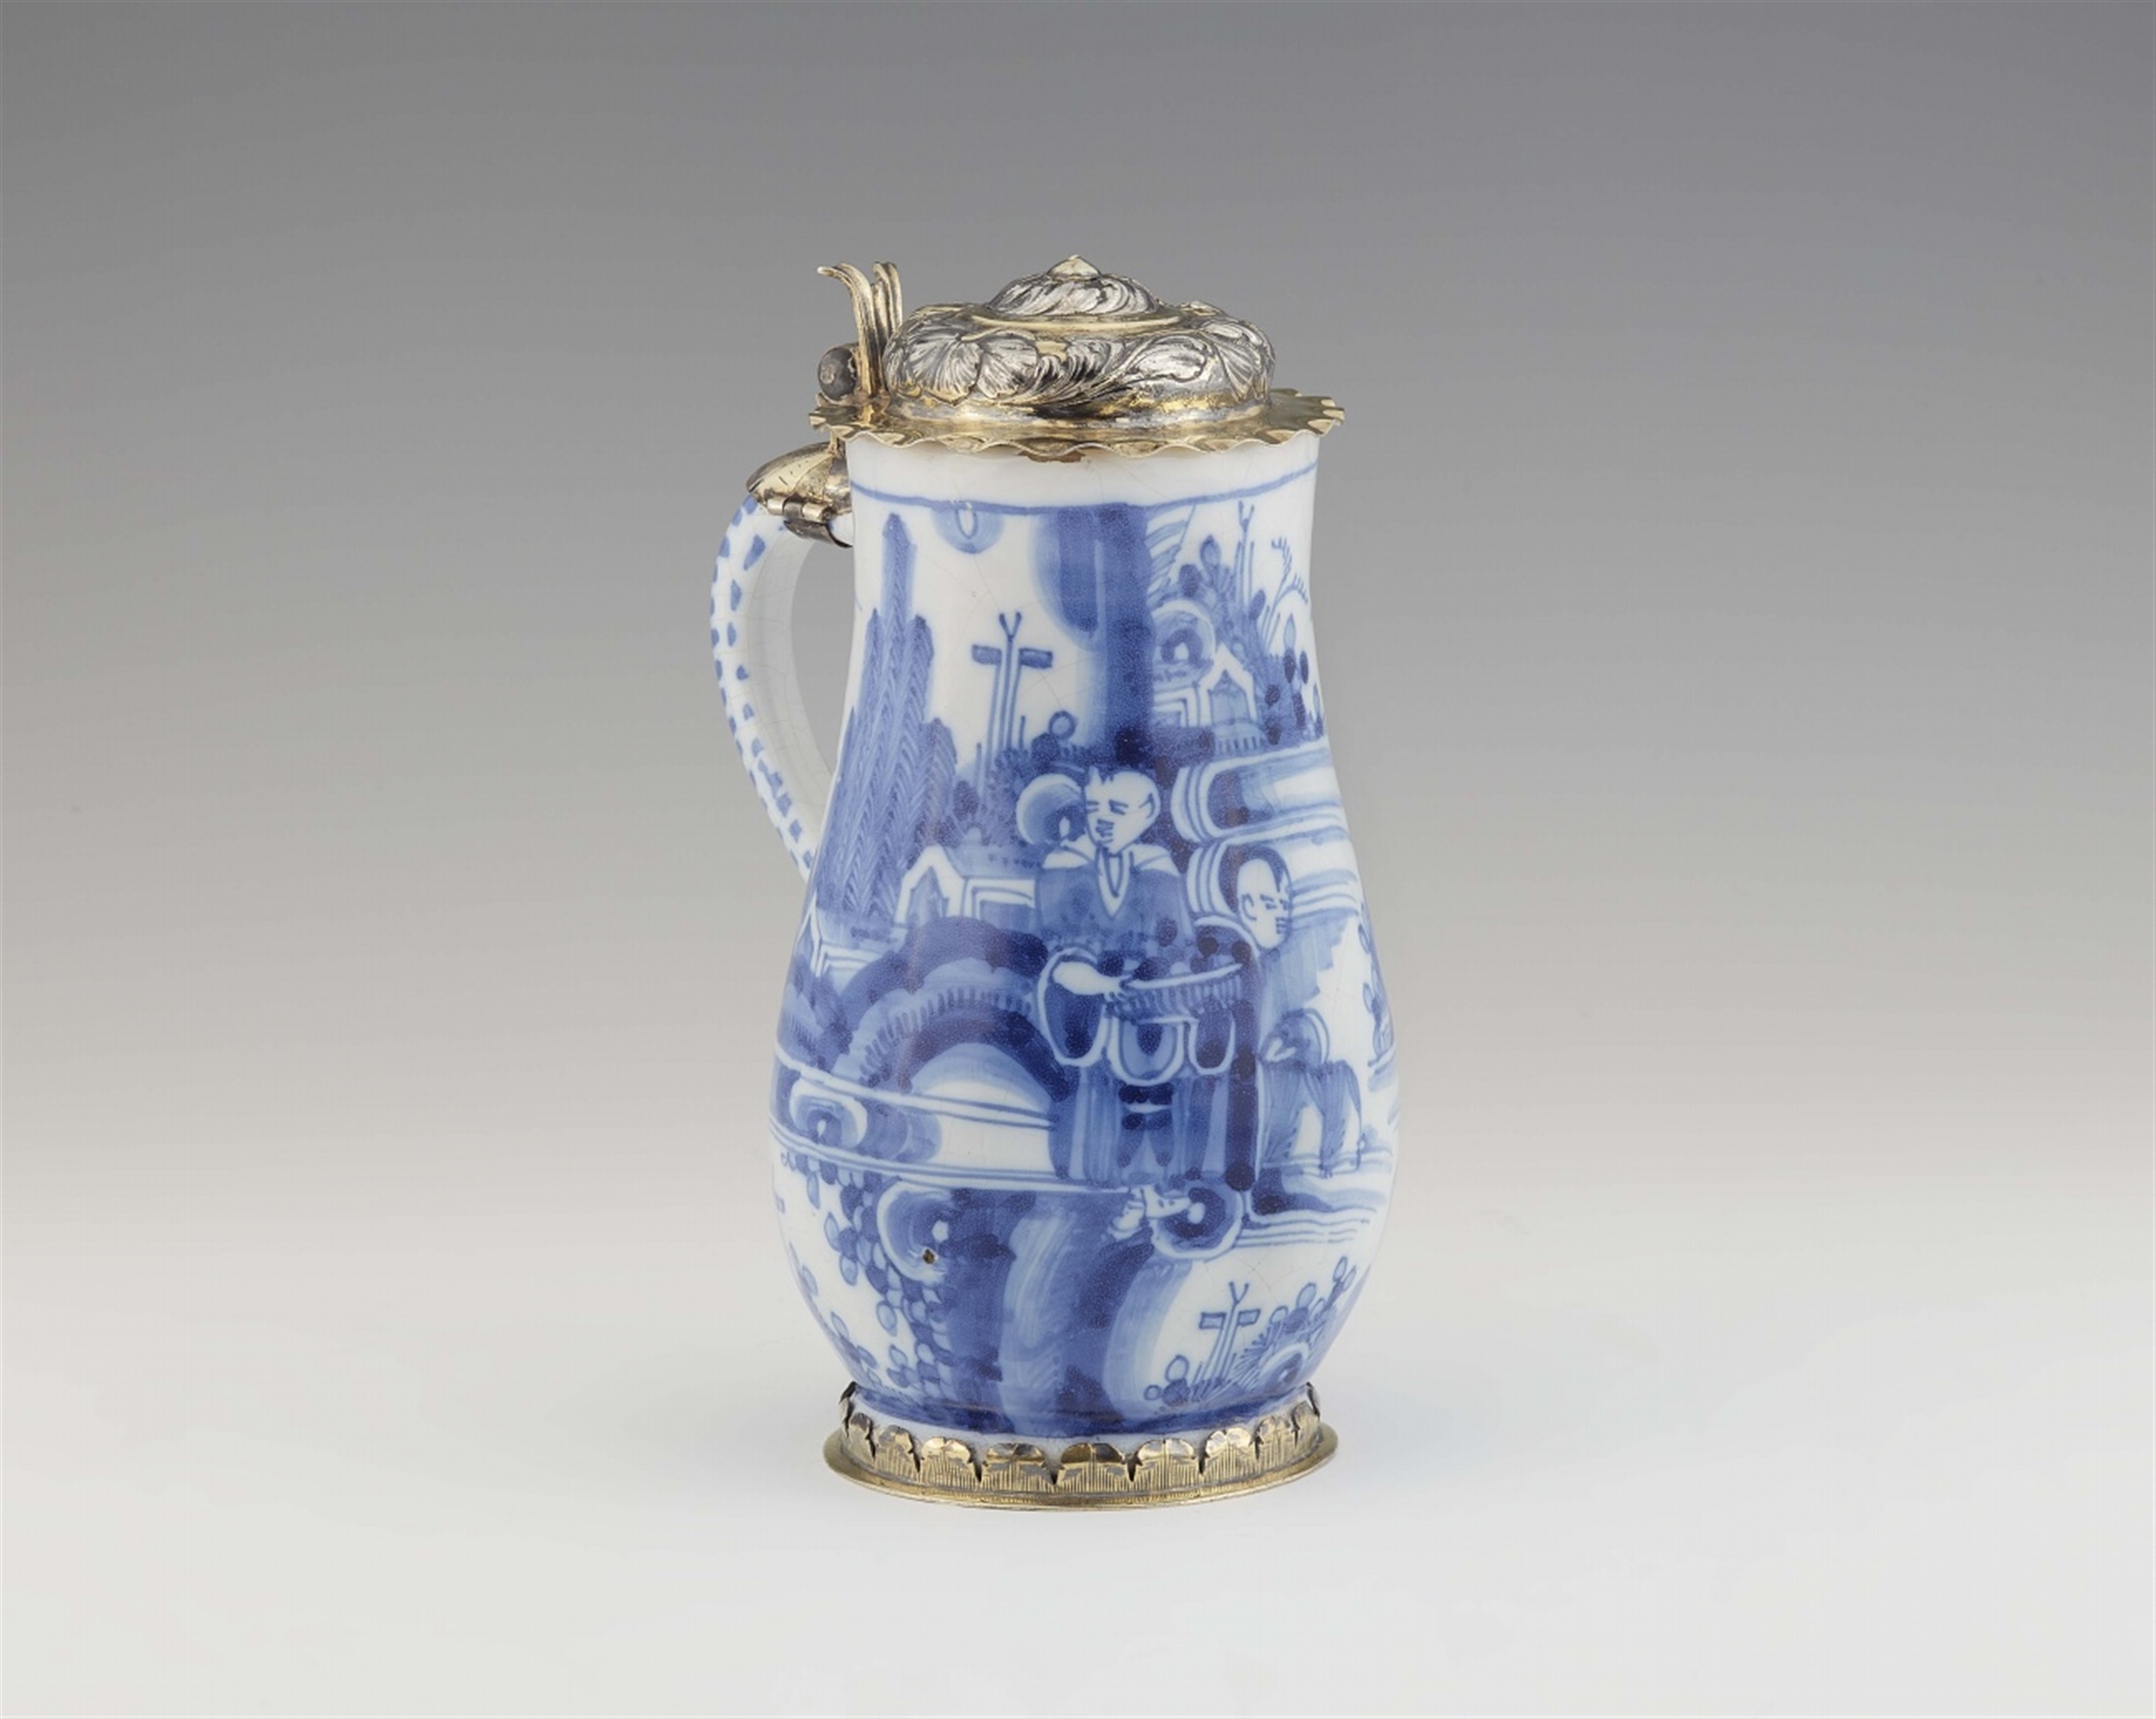 A faience pitcher with Salzburg silver mountings